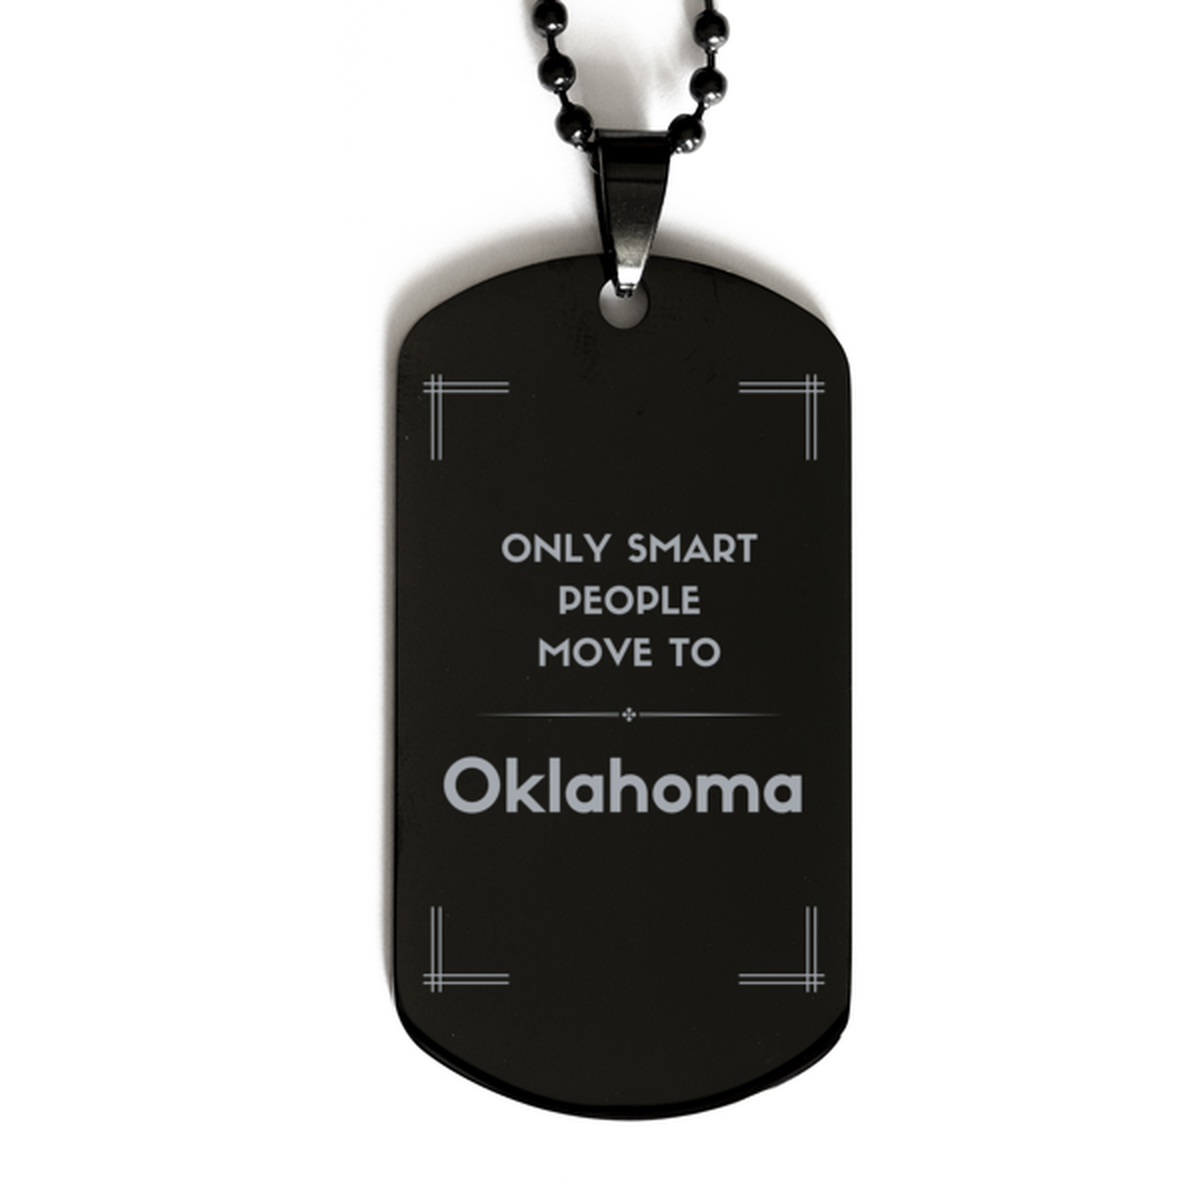 Only smart people move to Oklahoma Black Dog Tag, Gag Gifts For Oklahoma, Move to Oklahoma Gifts for Friends Coworker Funny Saying Quote